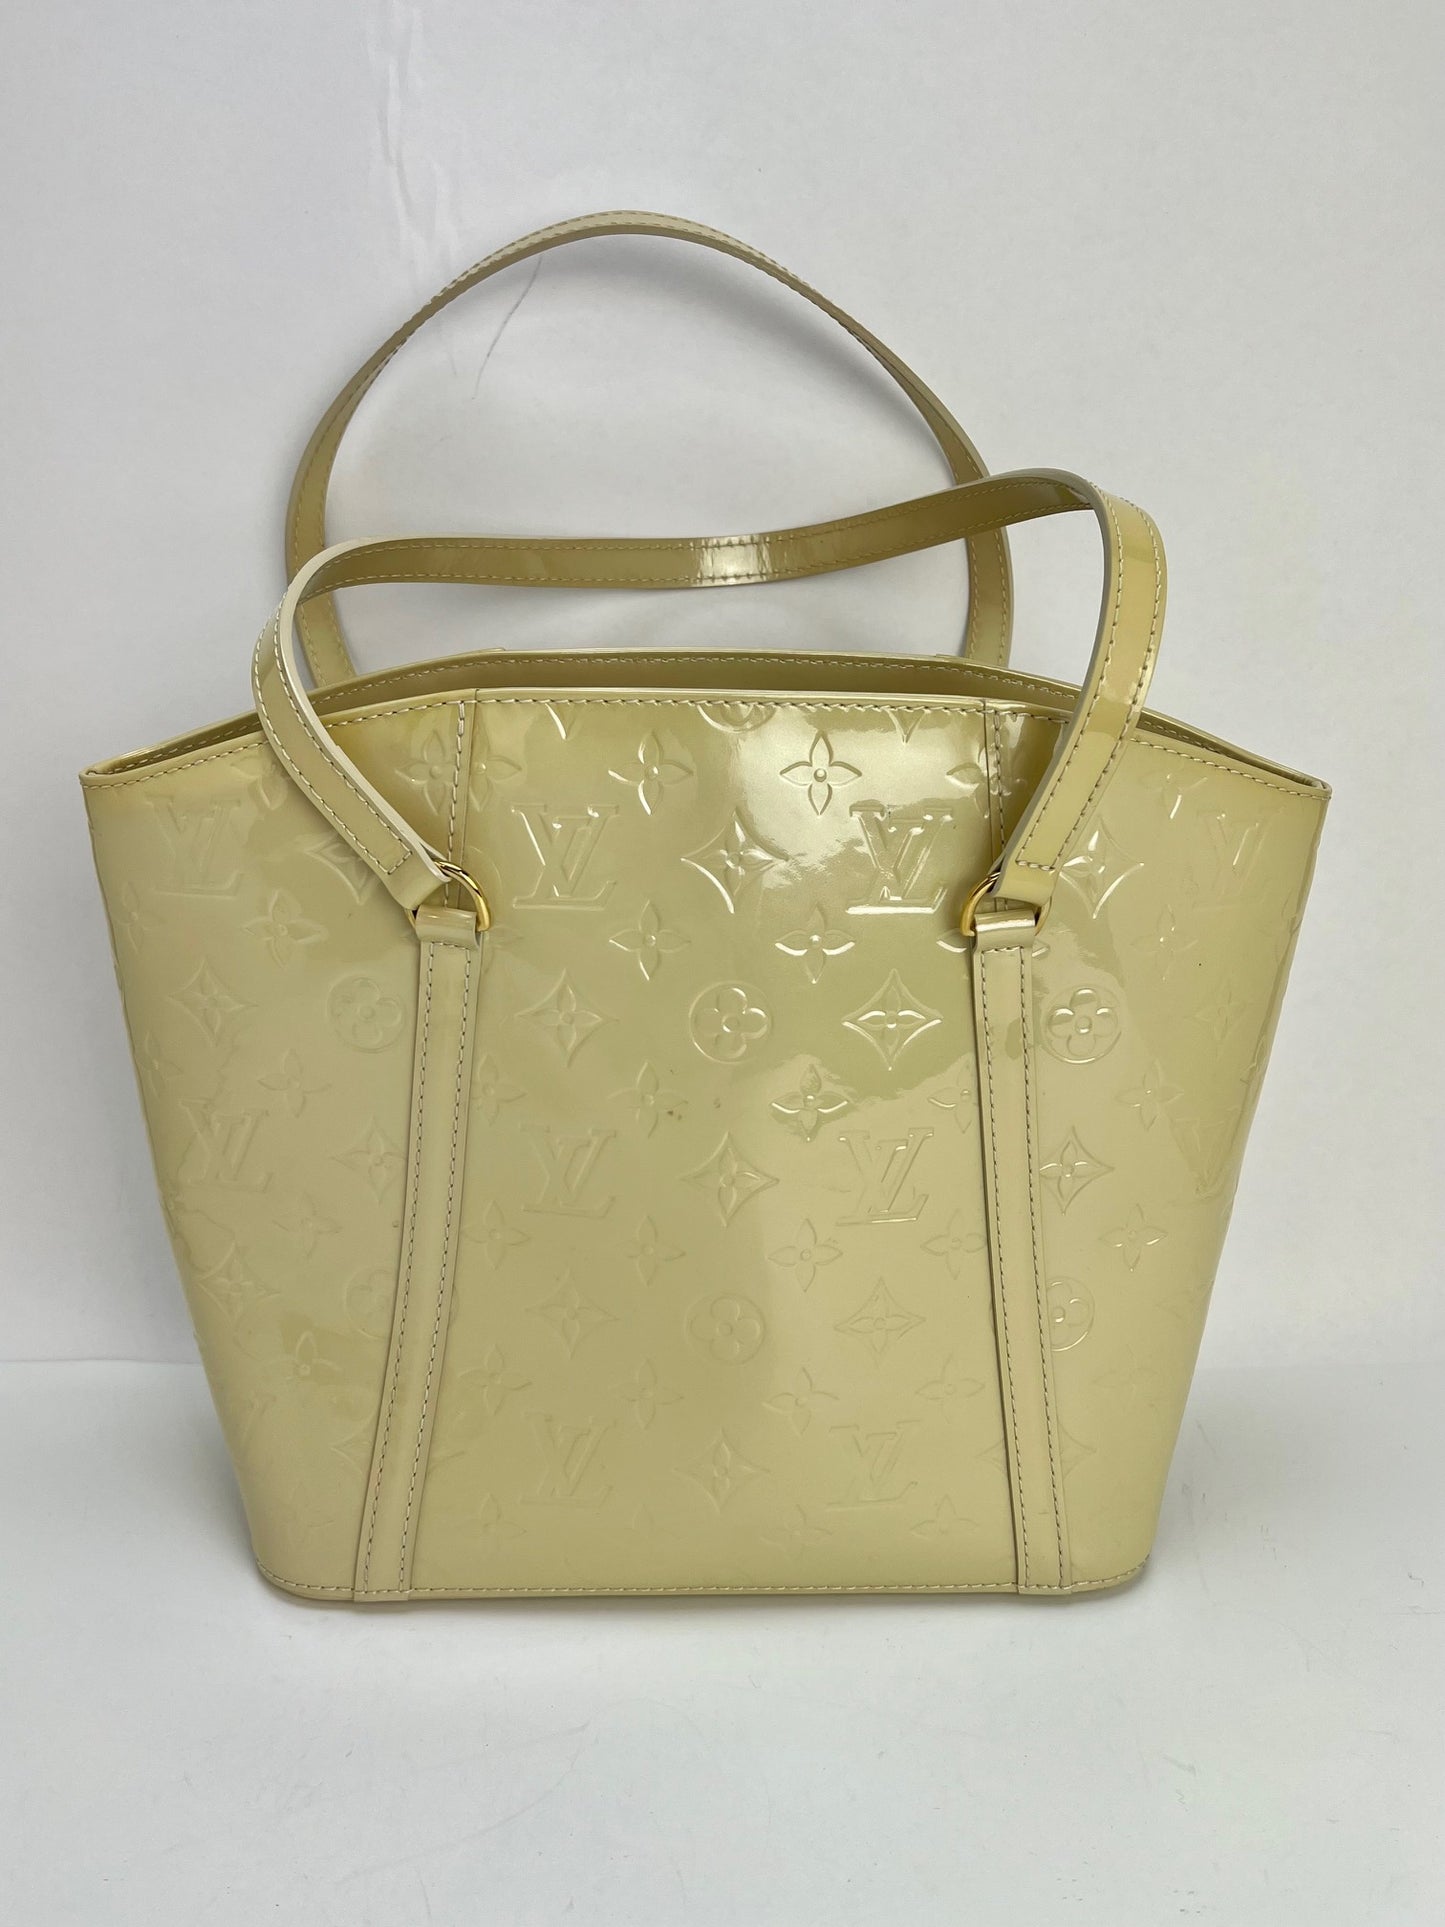 Louis Vuitton - Authenticated Avalon Handbag - Patent Leather Brown for Women, Very Good Condition